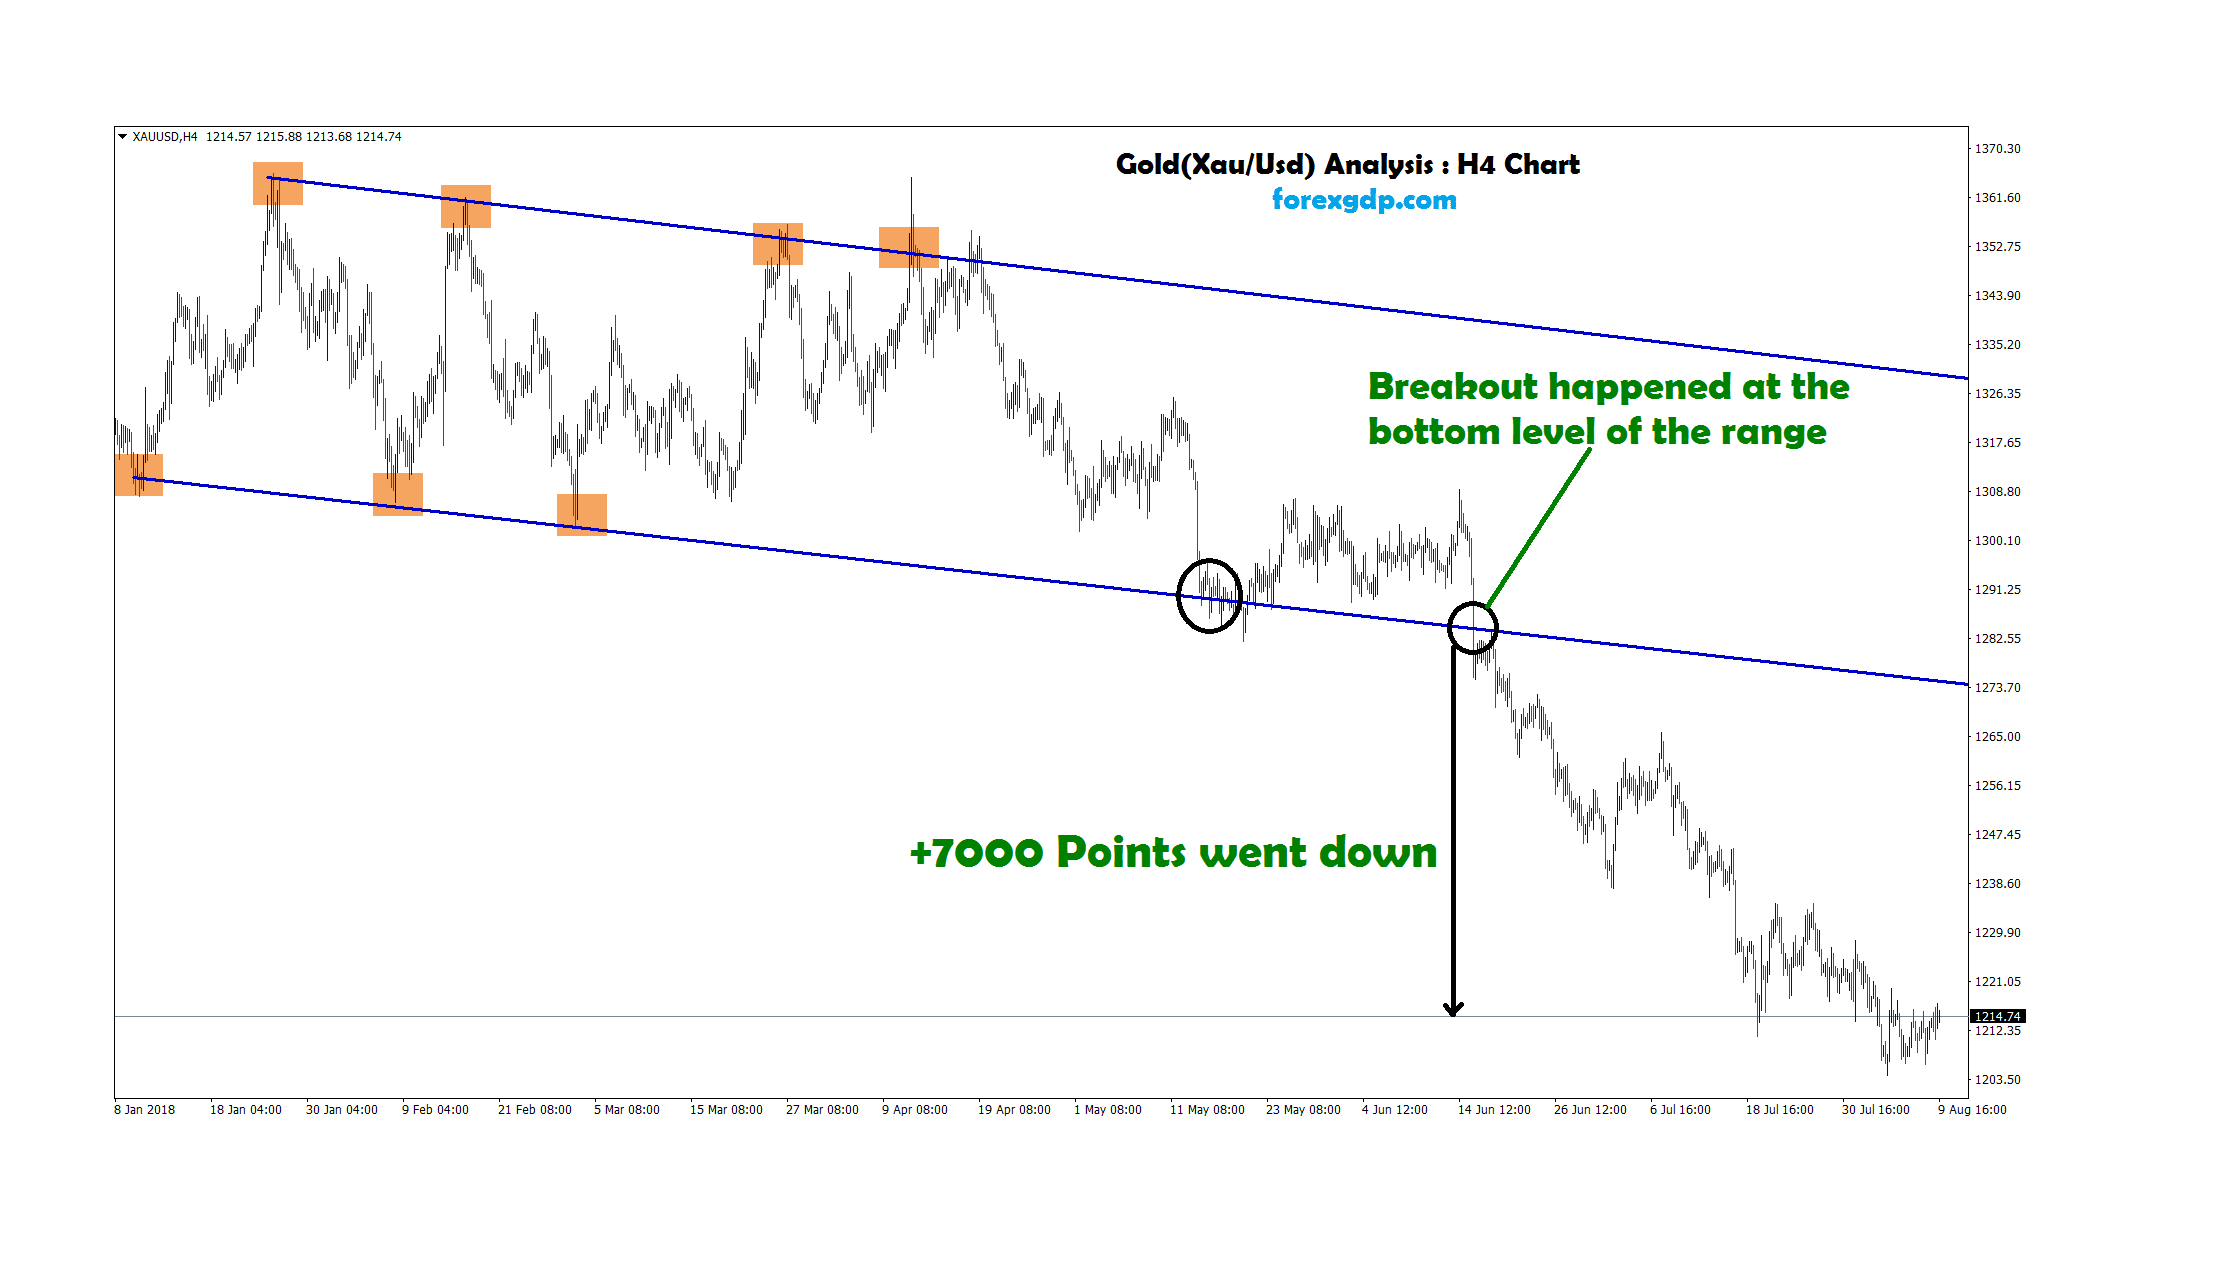 breakout happened at bottom of the range in gold